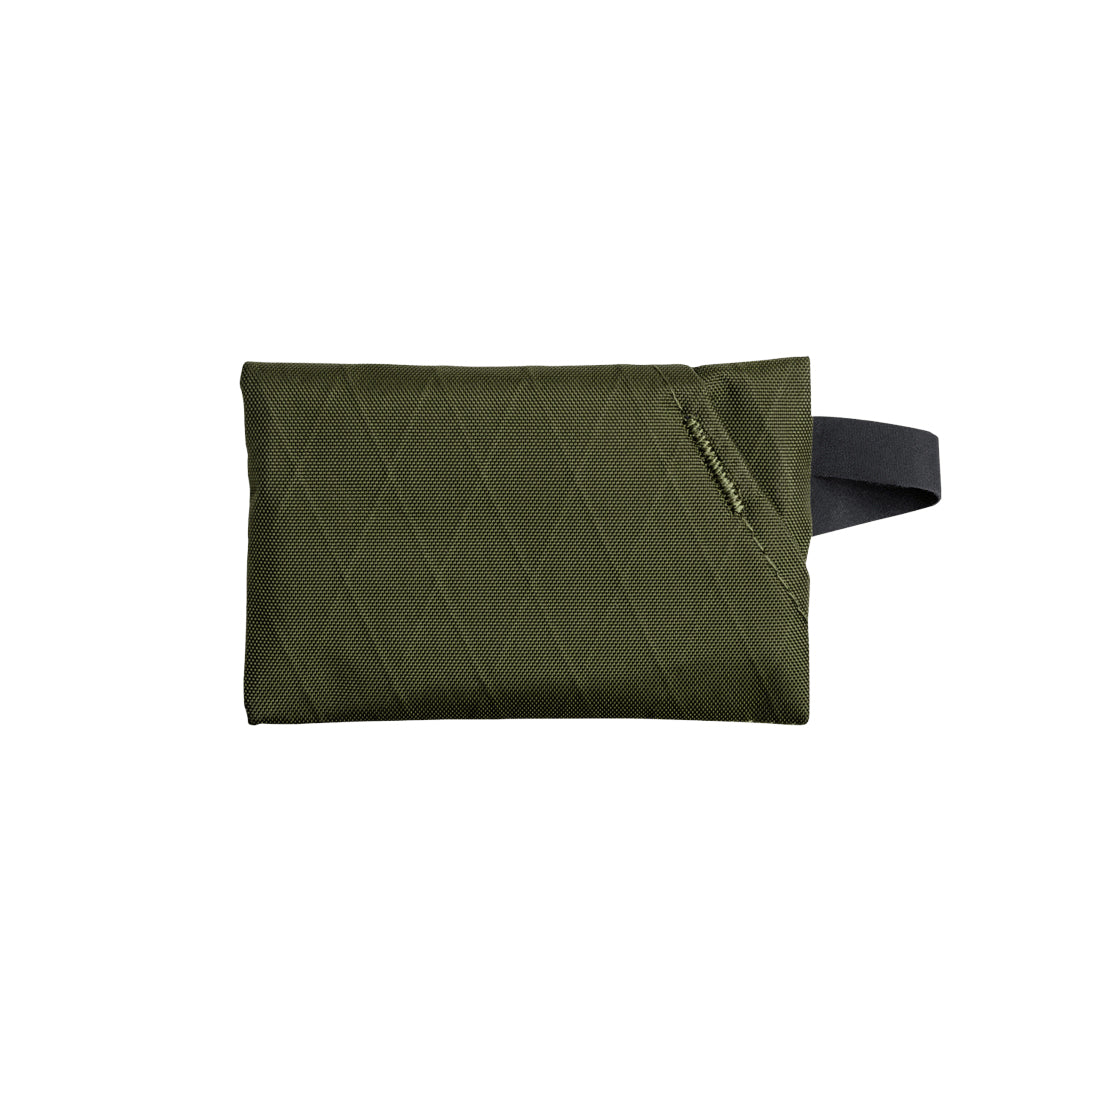 [PO] Able Carry : Joey Pouch : XPAC Olive Green (X42)